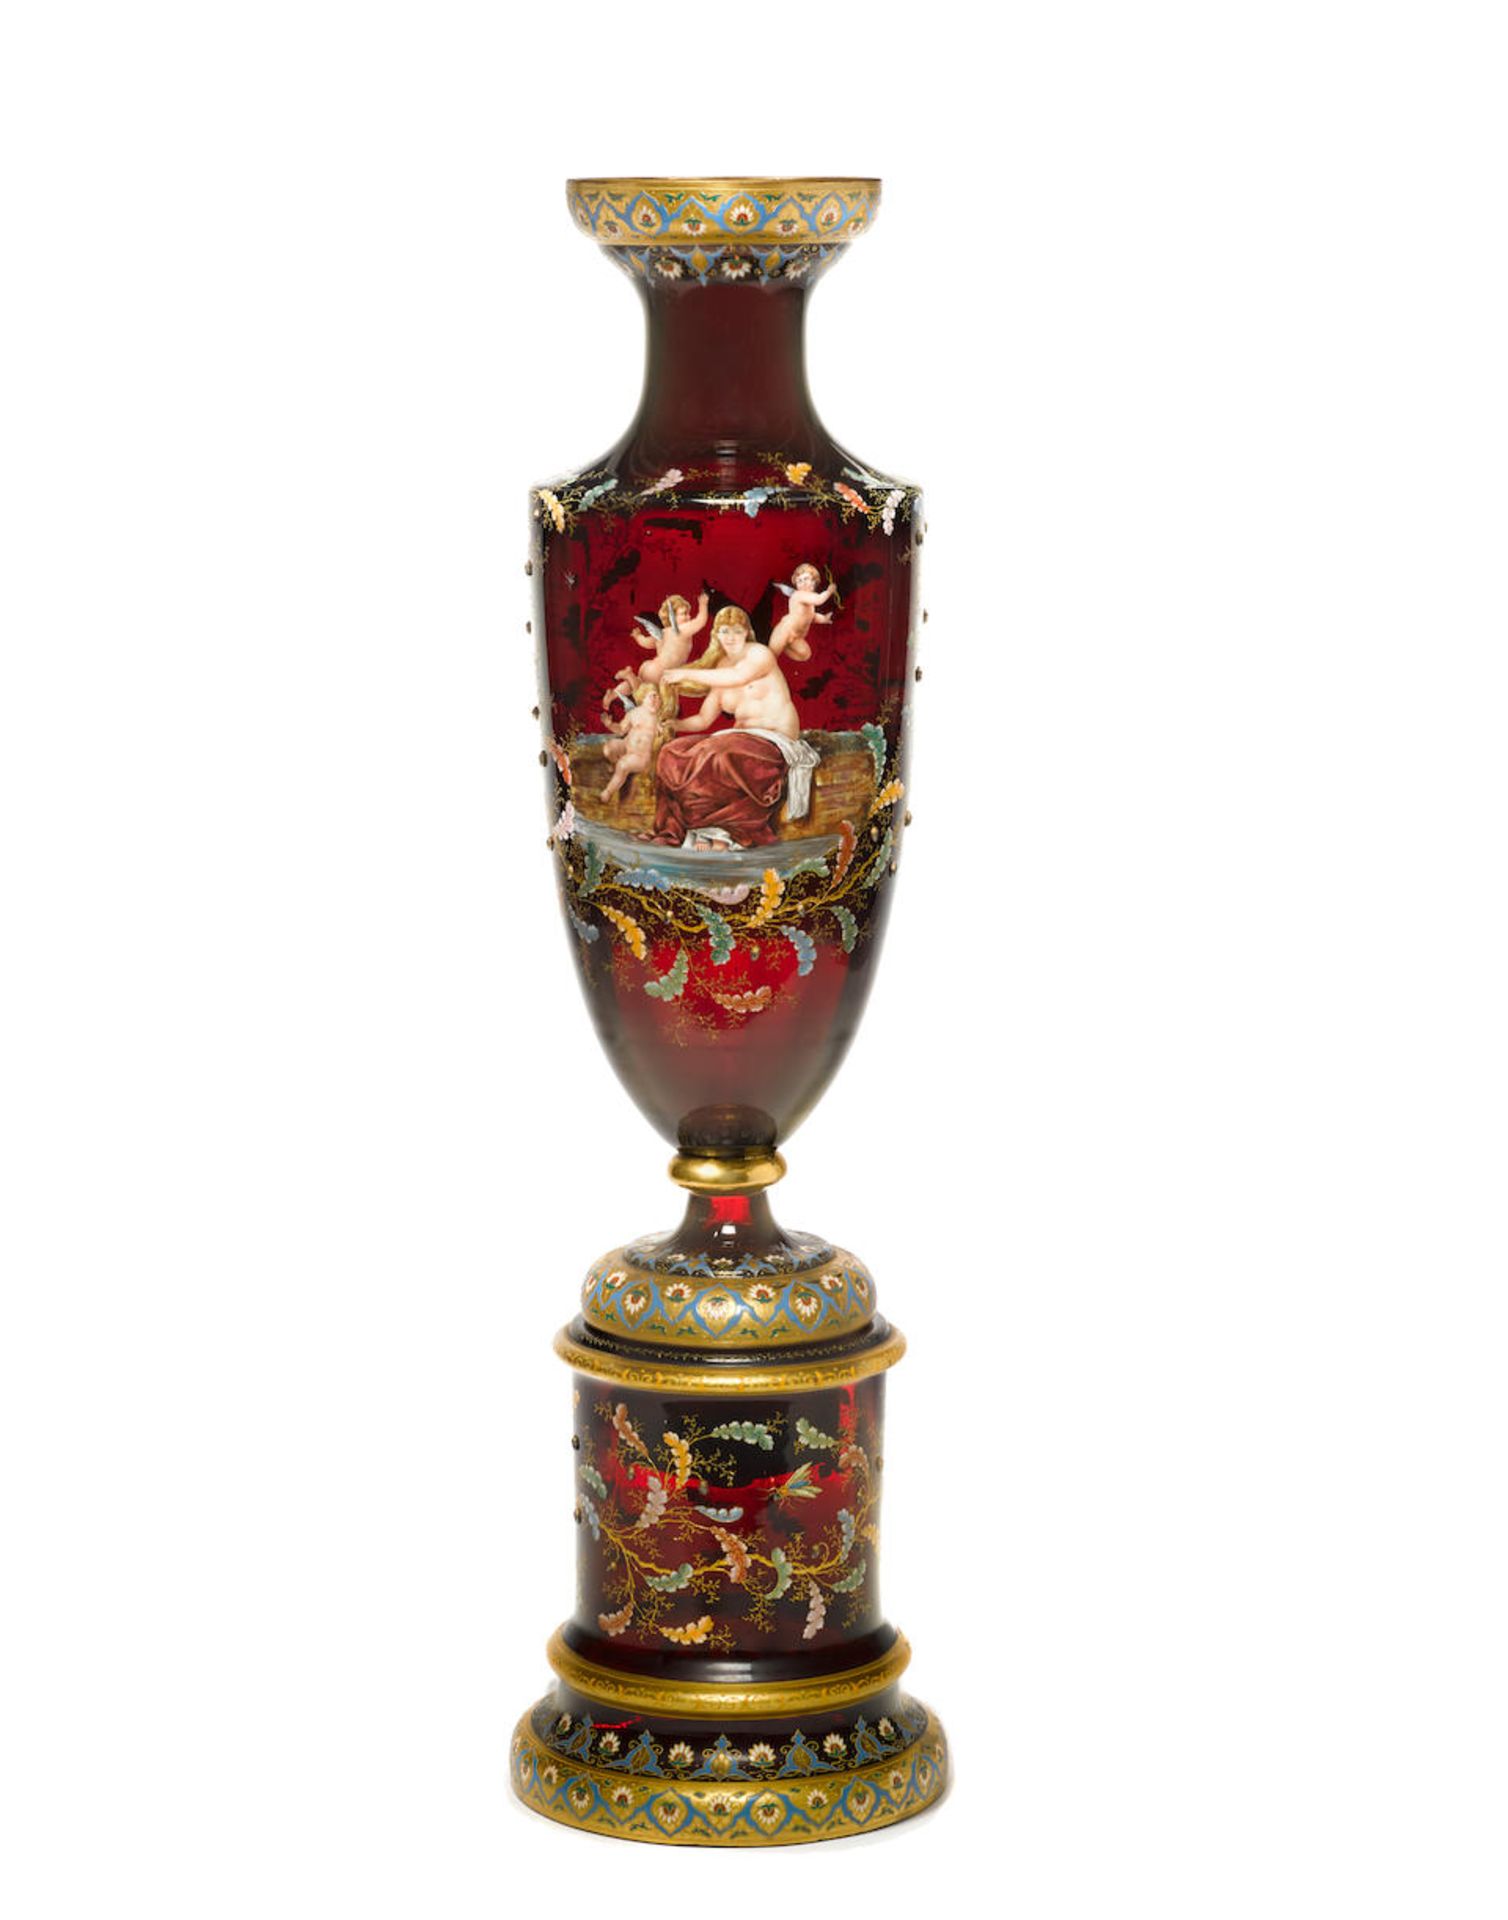 A MOSER GILT AND ENAMELLED RUBY GLASS VASE ON STANDCirca 1900